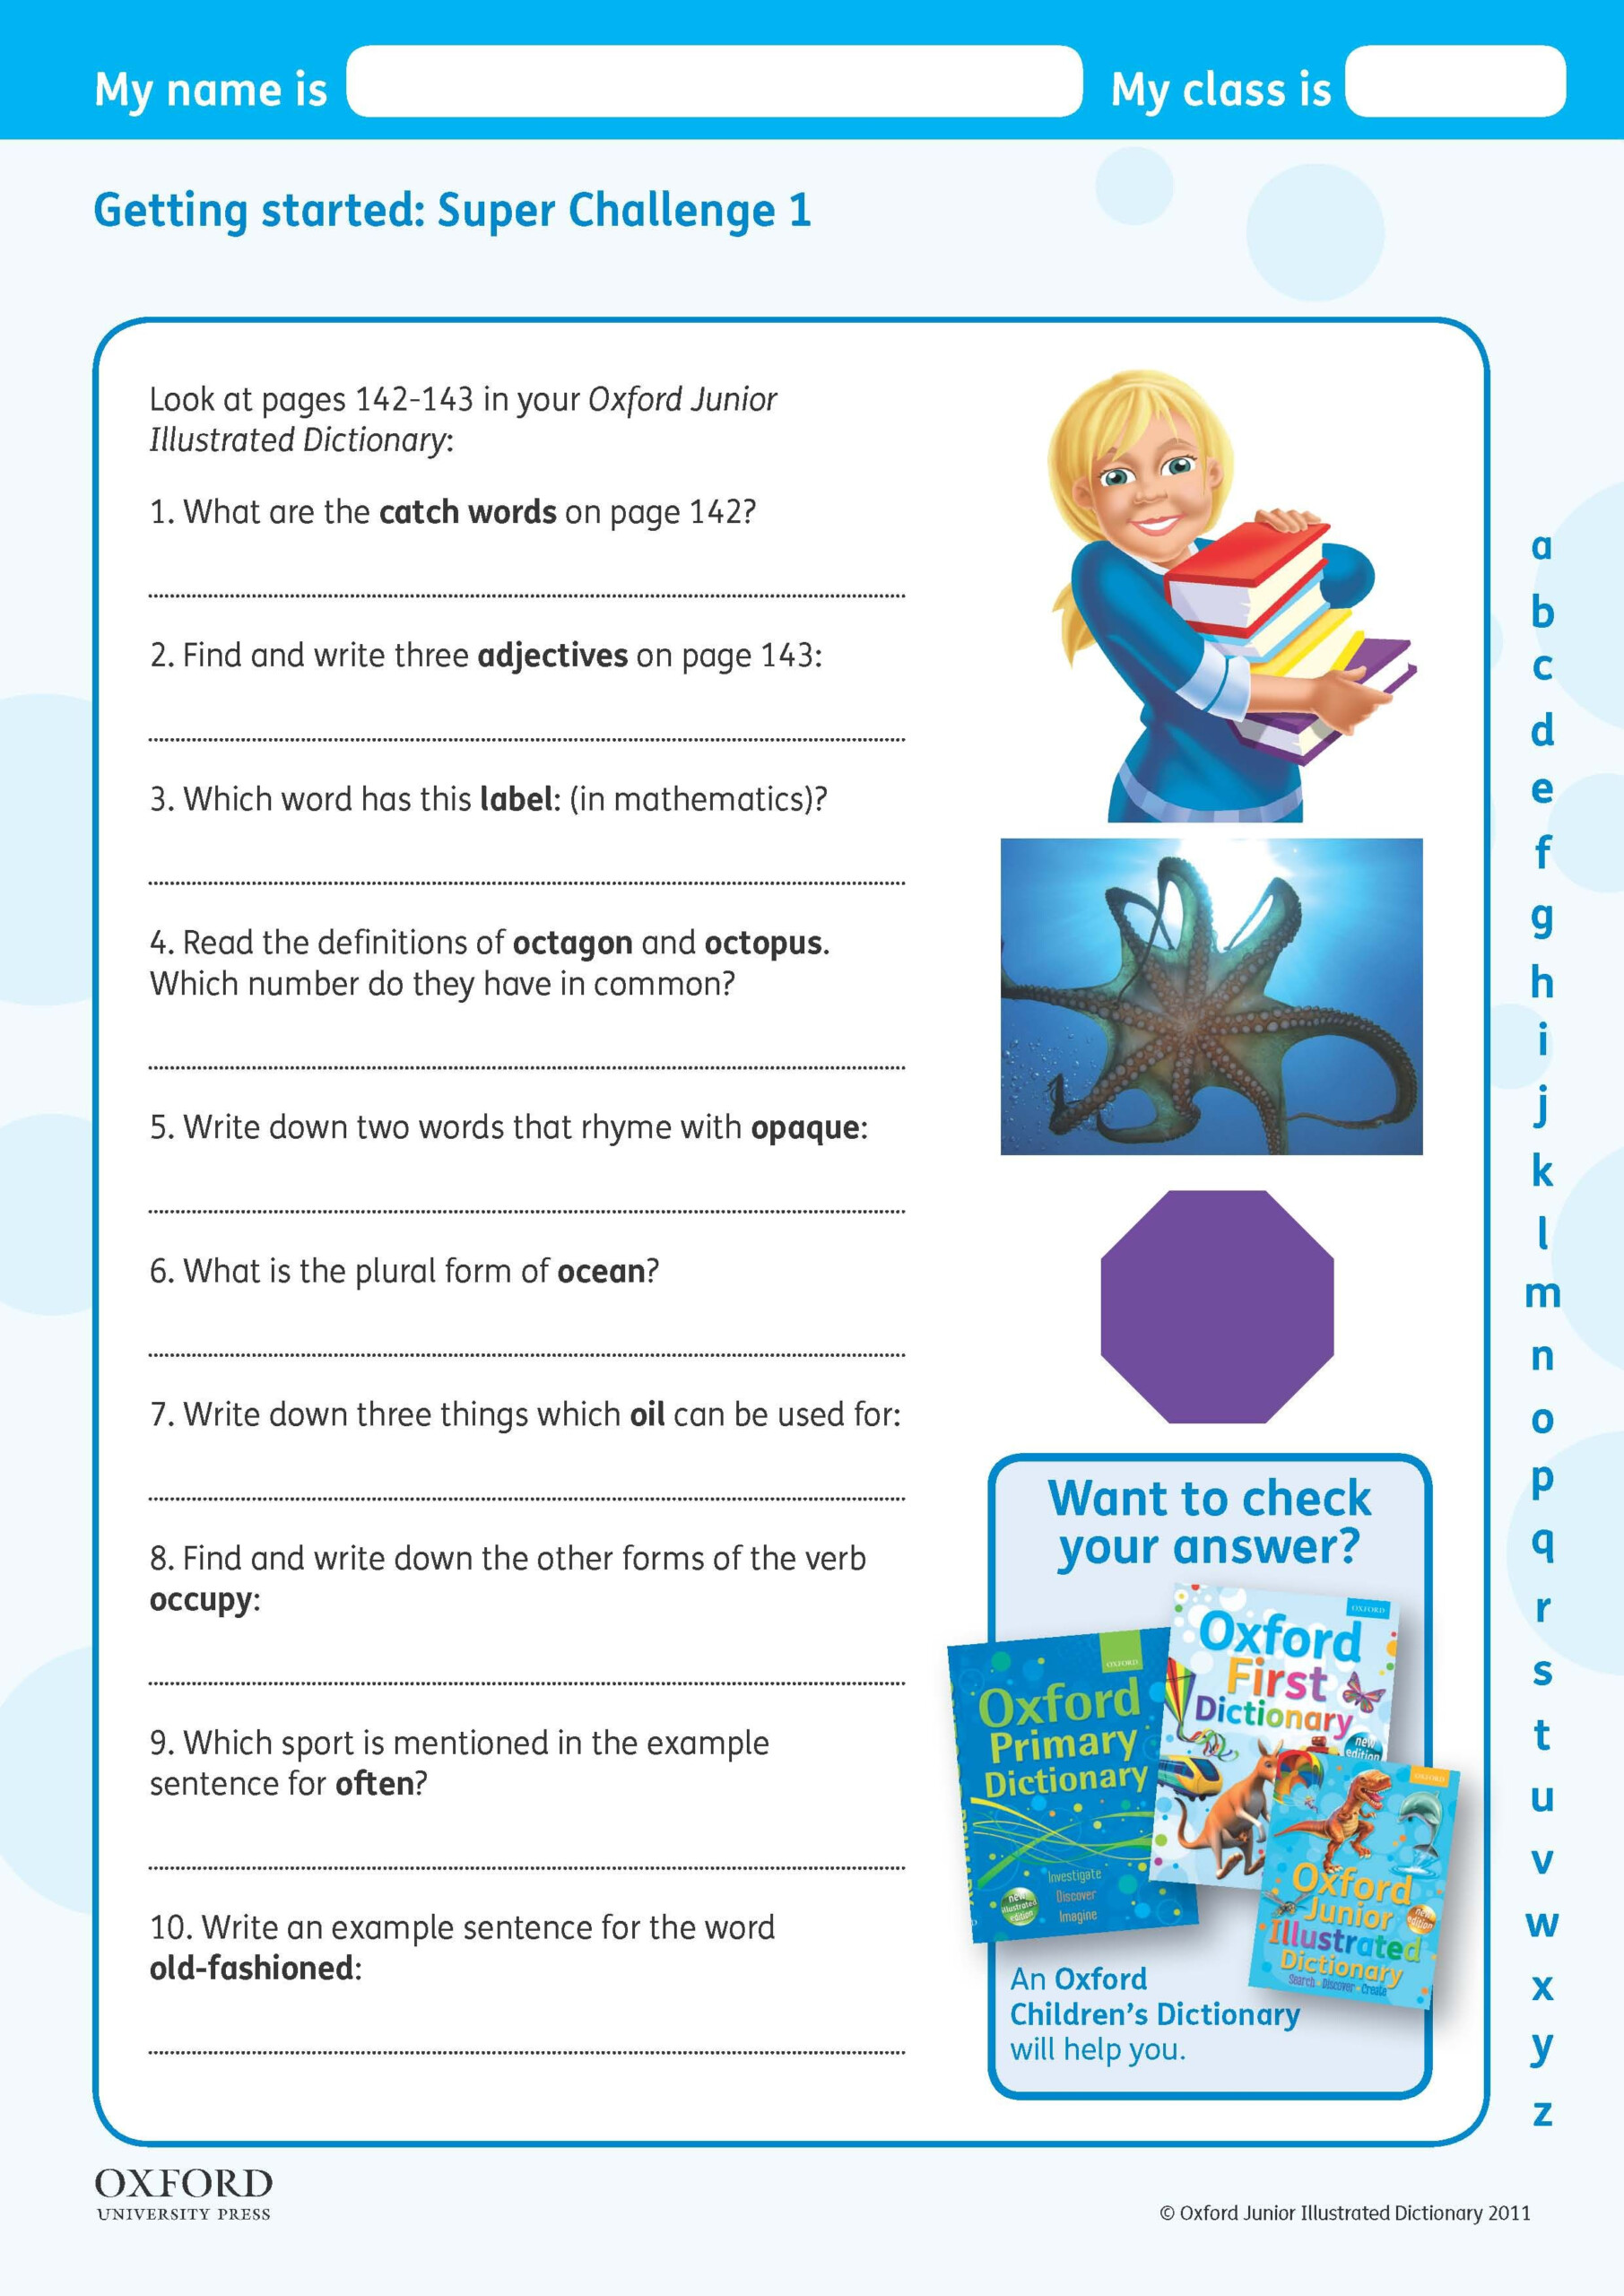 Download Your Free Oxford Junior Illustrated Dictionary Challenge